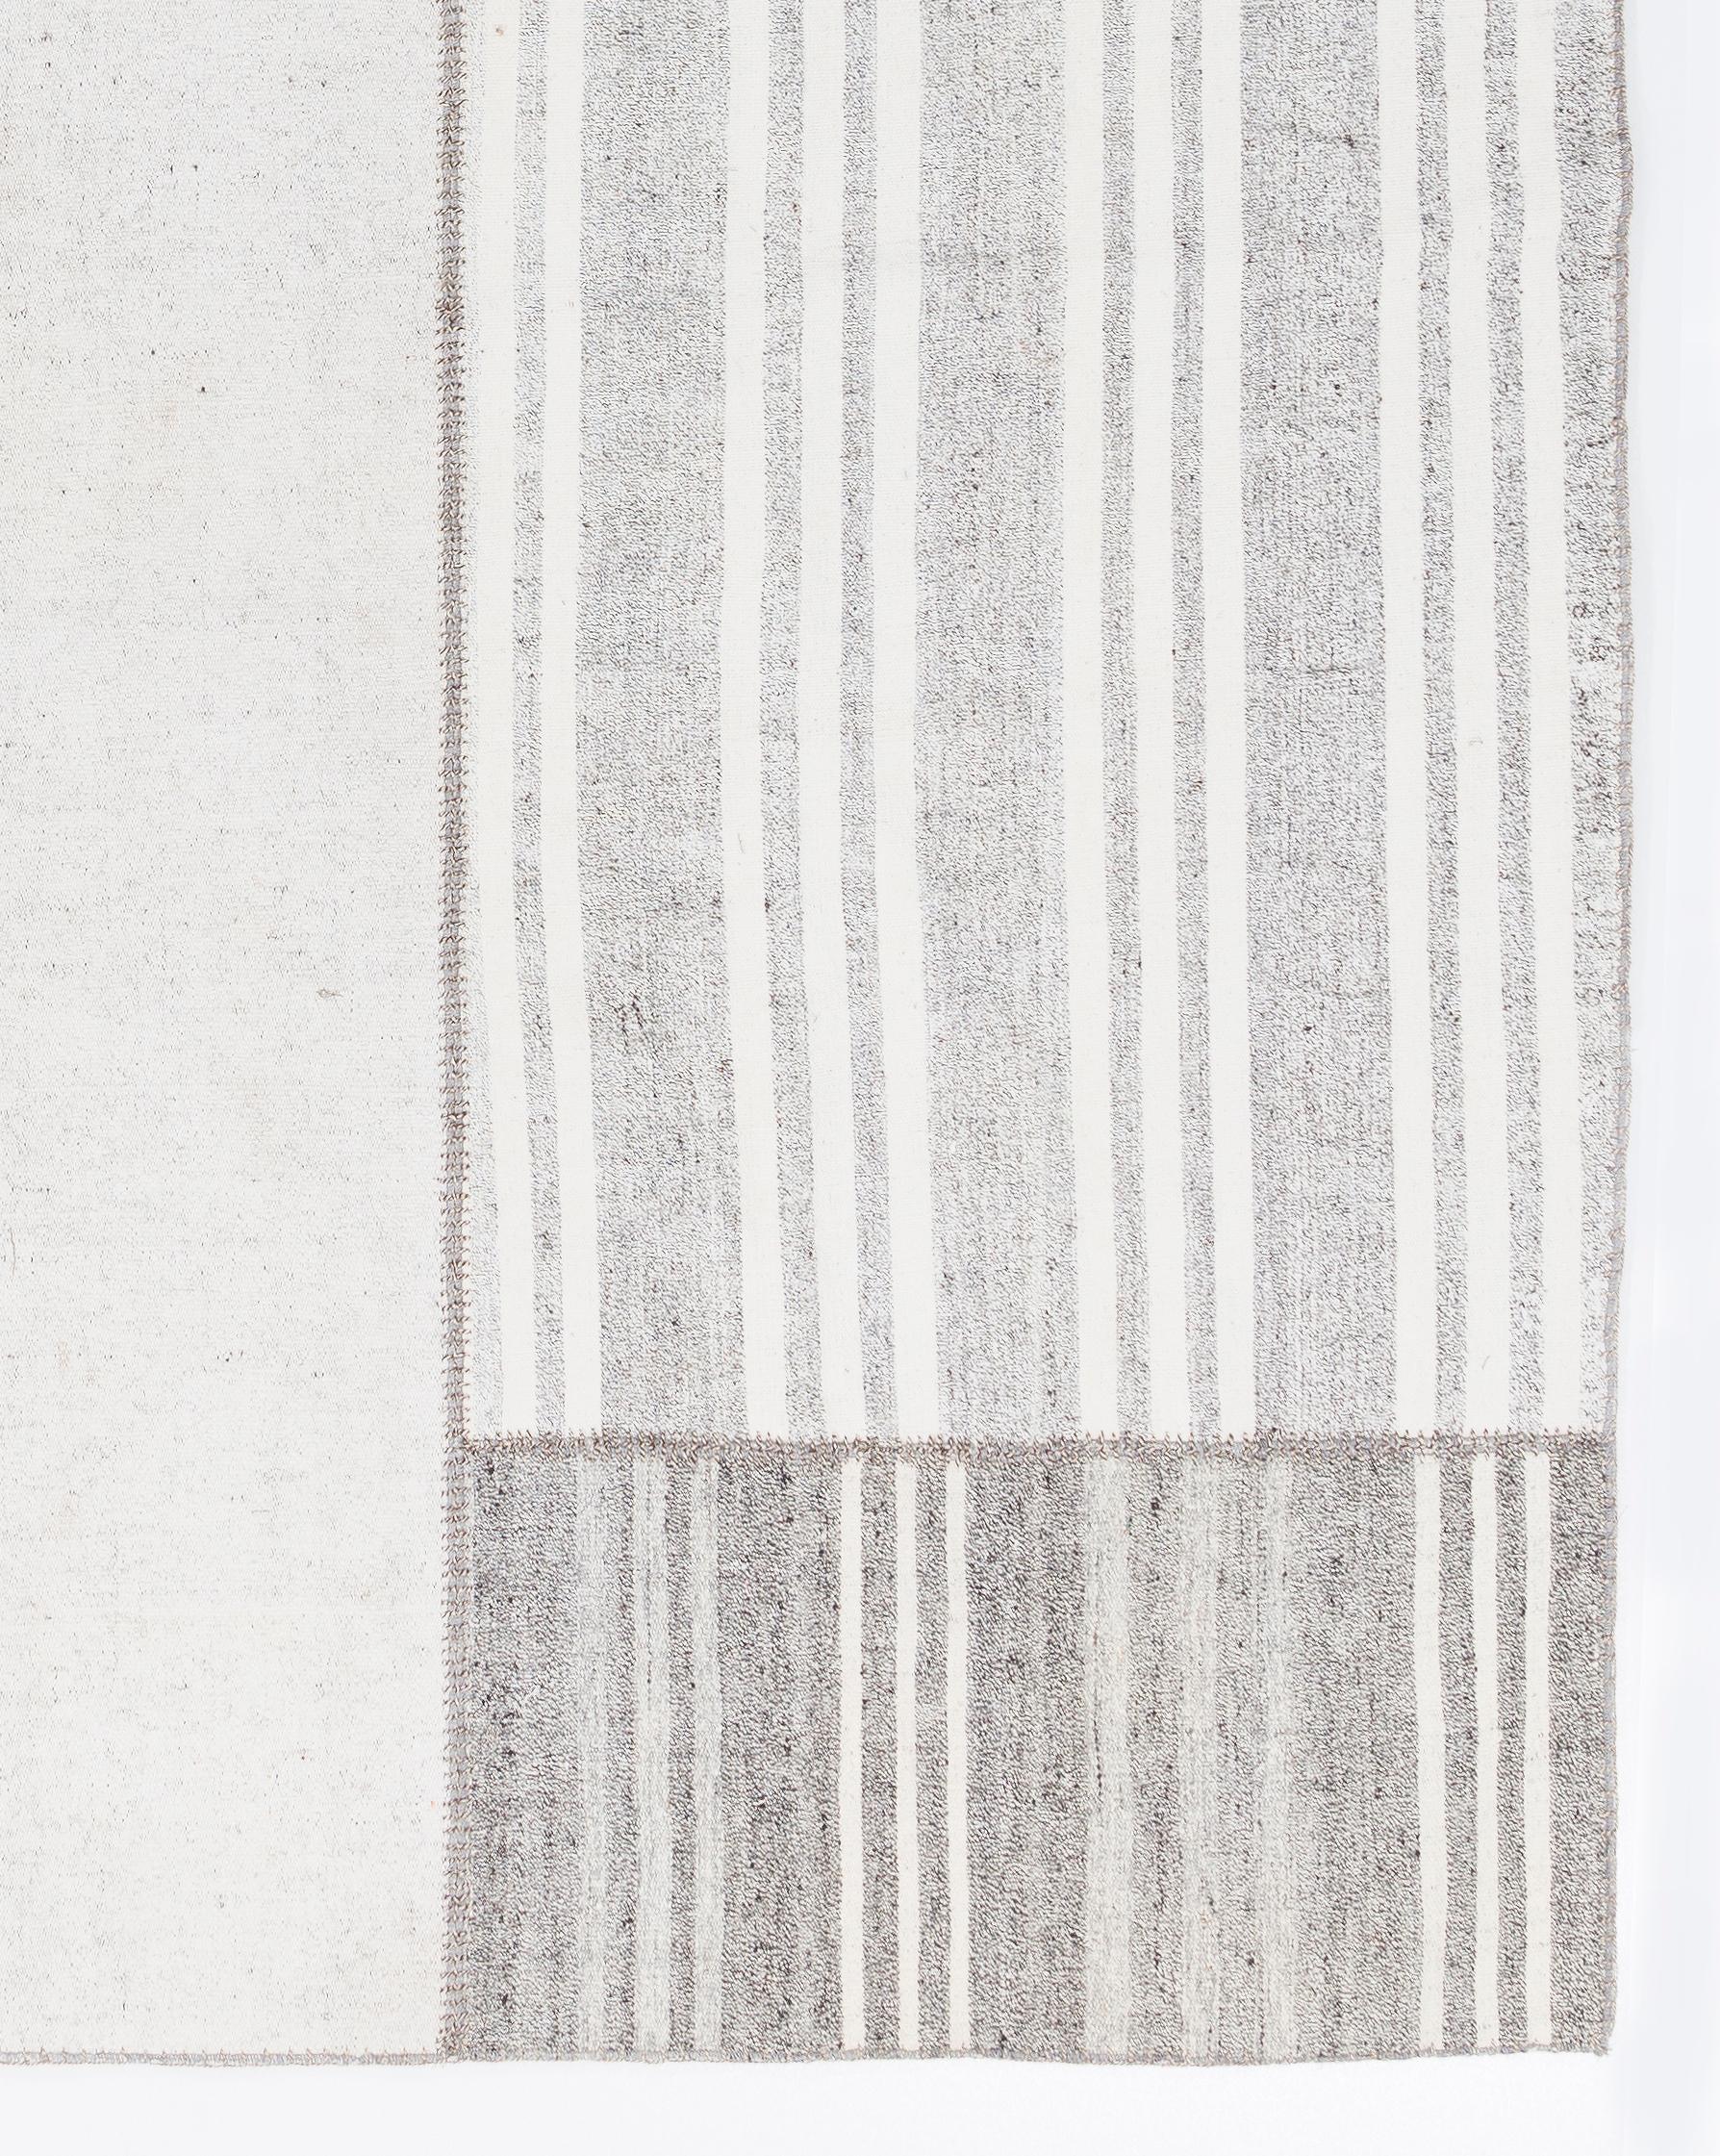 Late 20th Century 8.4x10.3 Ft Hand-Woven Vintage Cotton Anatolian Kilim in Gray with White Stripes For Sale